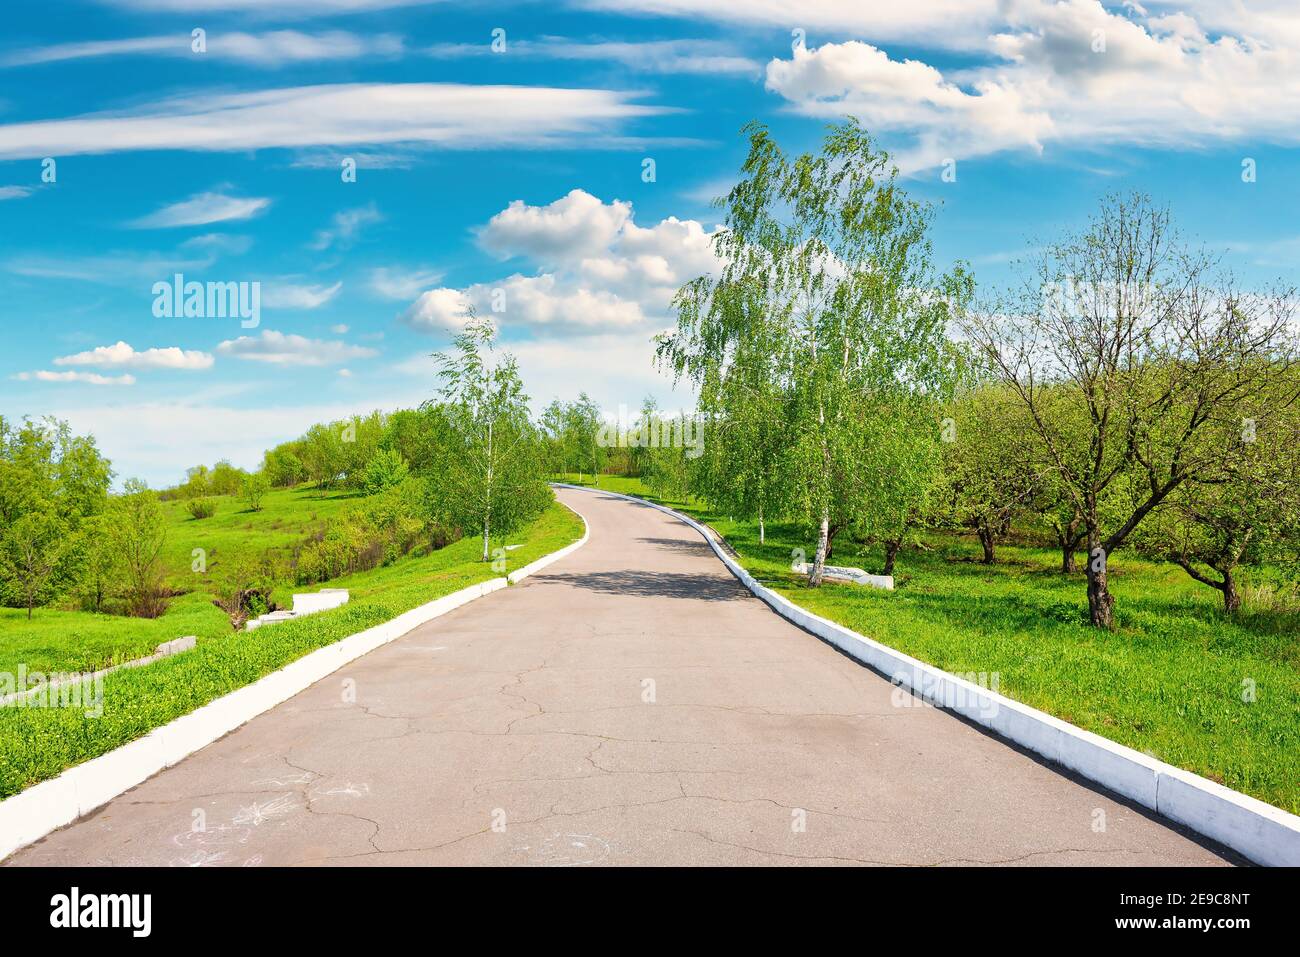 Asphalt road in the park on a sunny day. Stock Photo